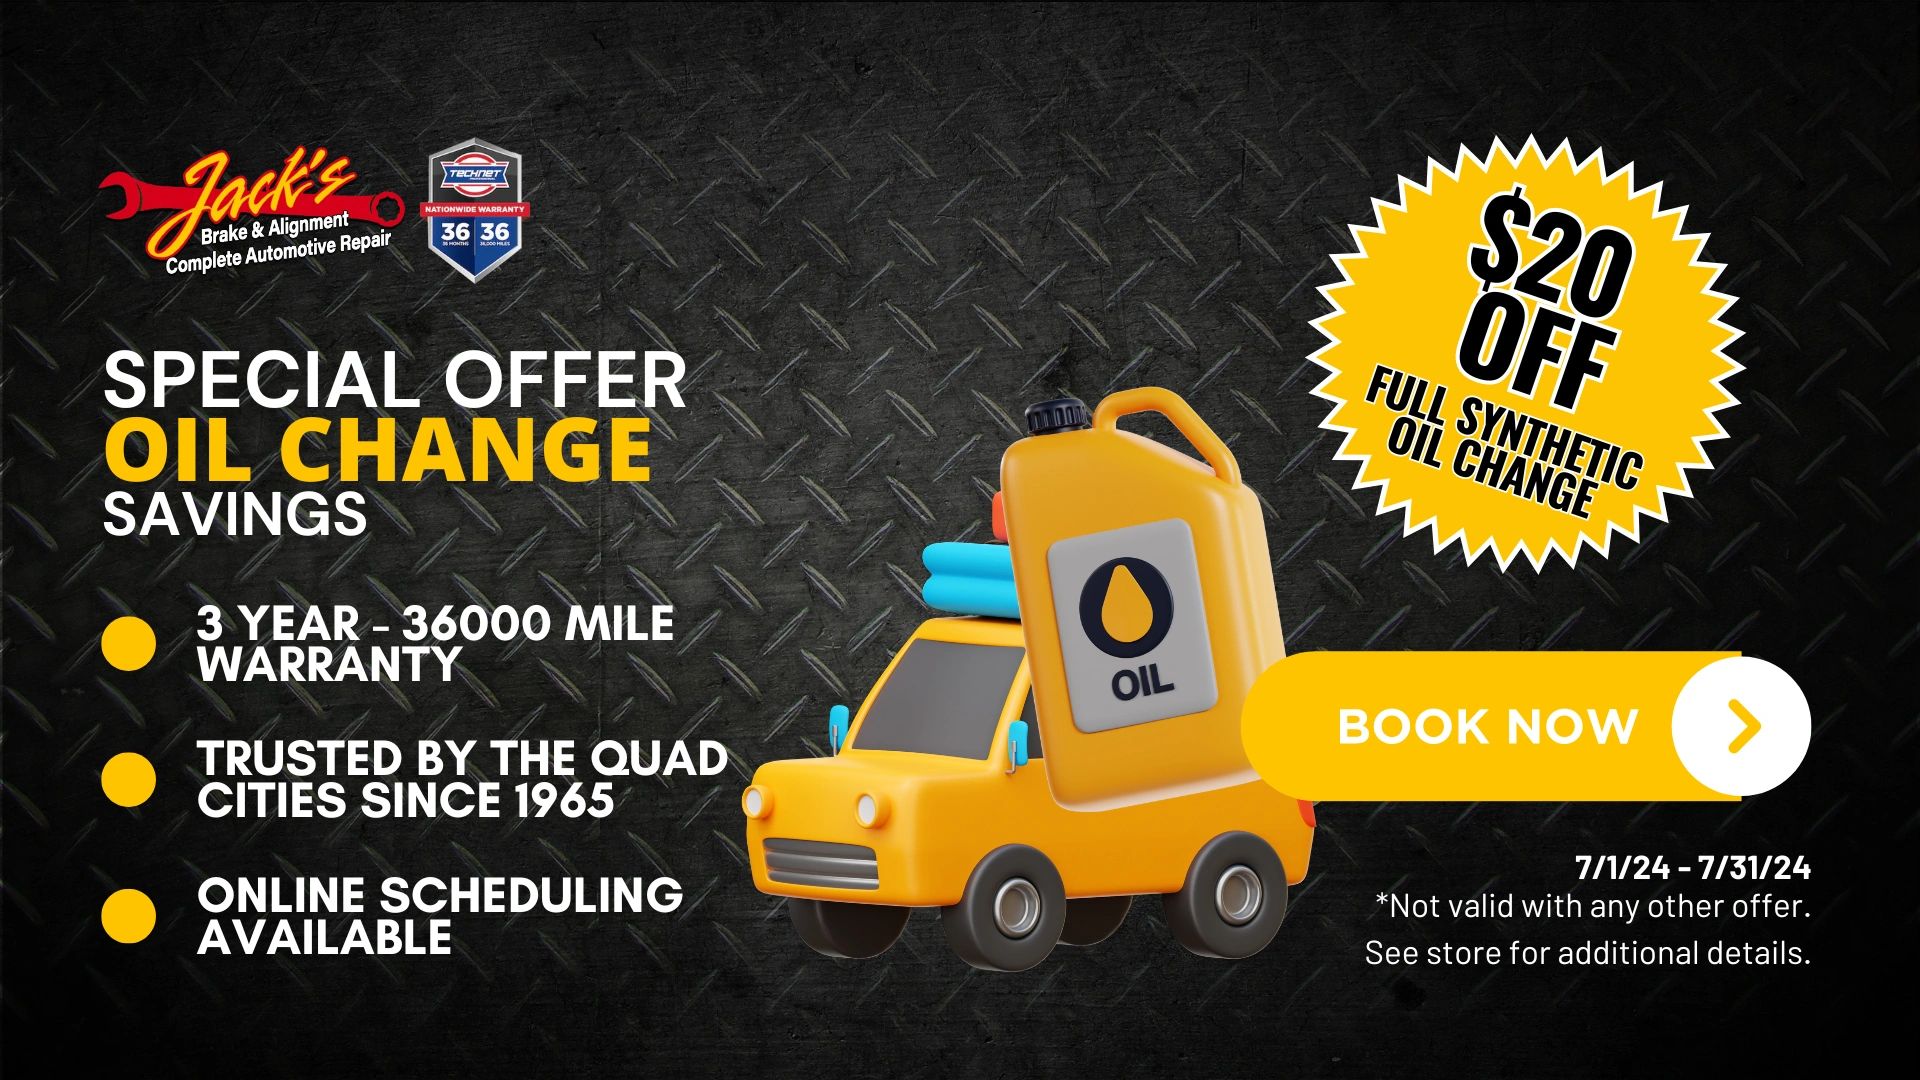 lowest priced oil change in the quad cities, cheap oil change in davenport, oil change coupons